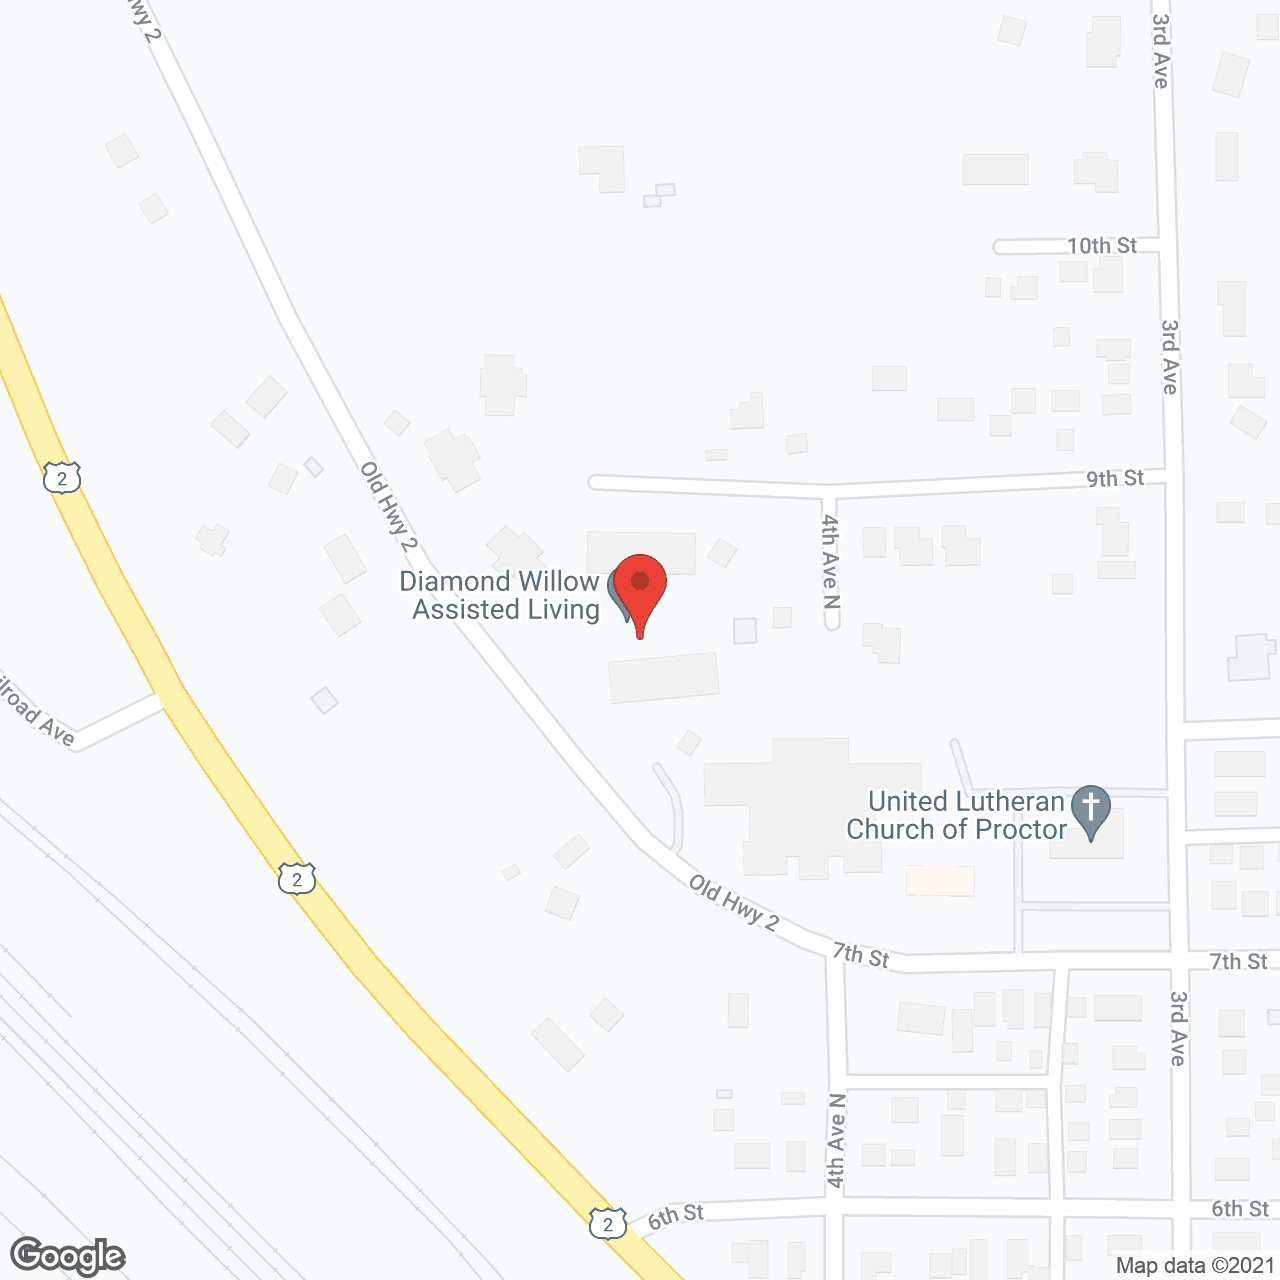 Diamond Willow Assisted Living of Proctor in google map